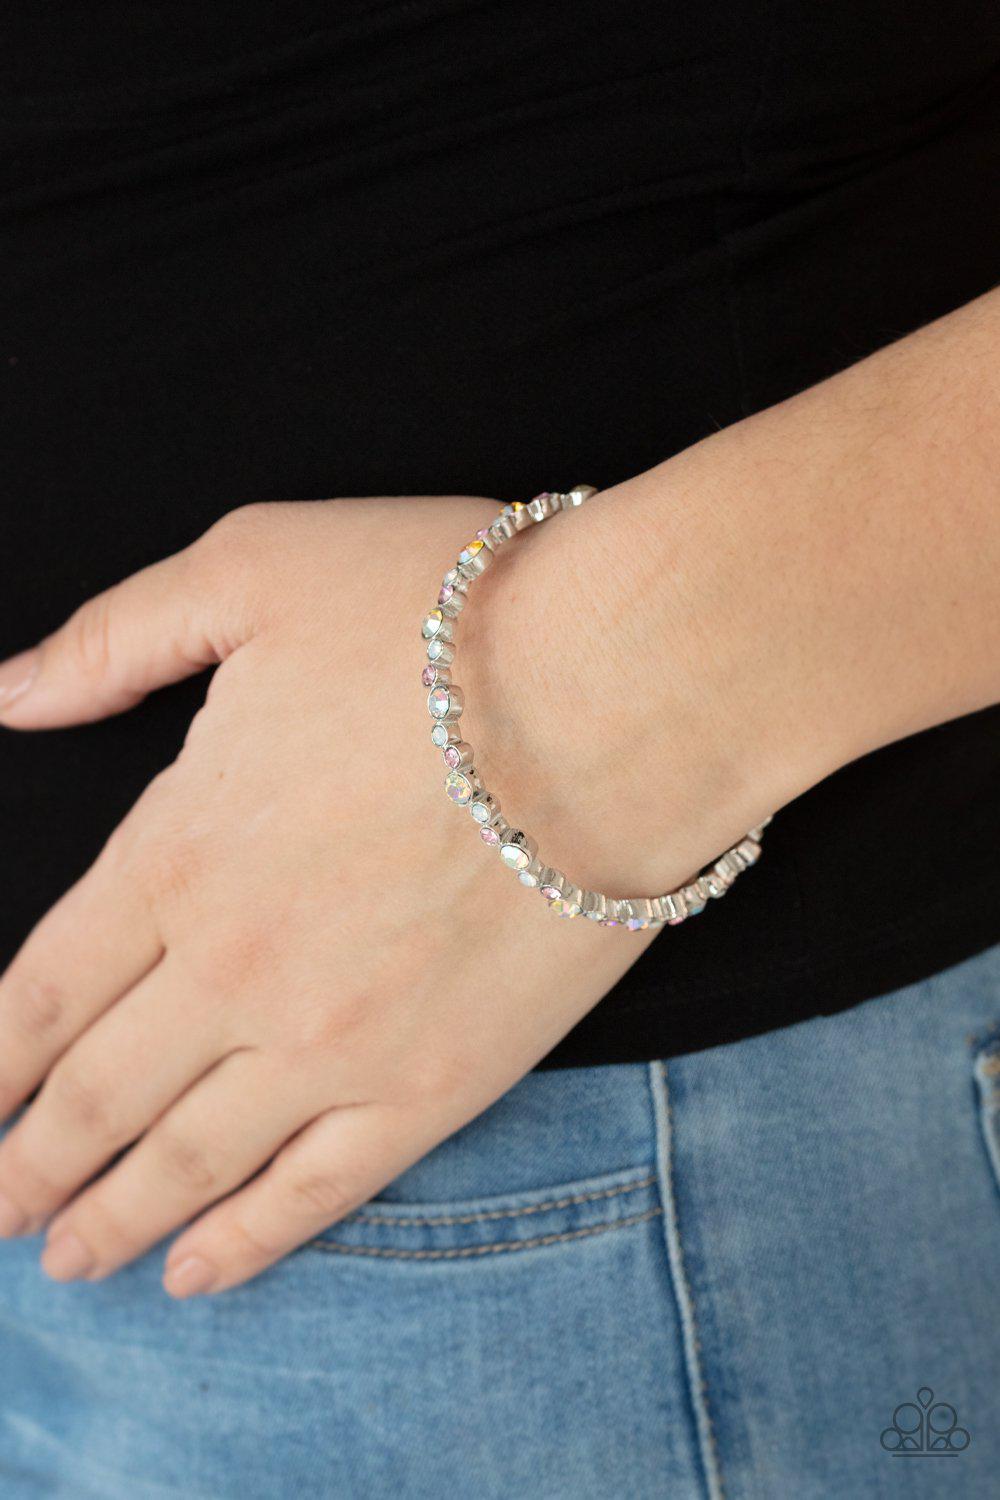 Twinkly Trendsetter Multi Pink, White and Iridescent Rhinestone Bangle Bracelet - Paparazzi Accessories- model - CarasShop.com - $5 Jewelry by Cara Jewels